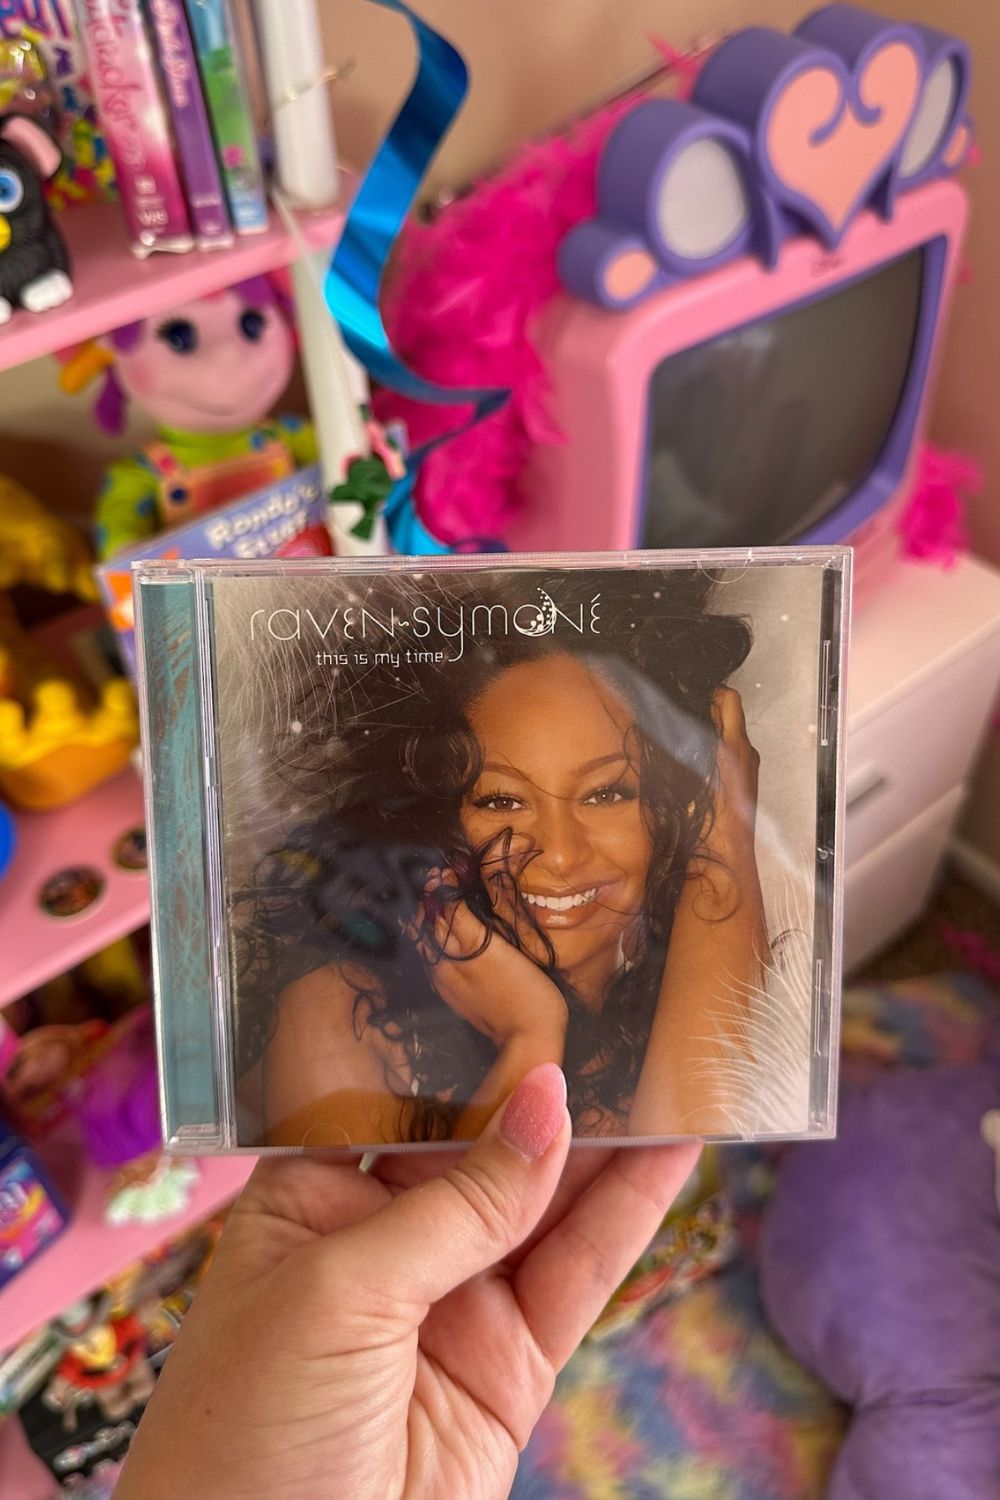 RAVEN SYMONE "THIS IS MY TIME" CD*